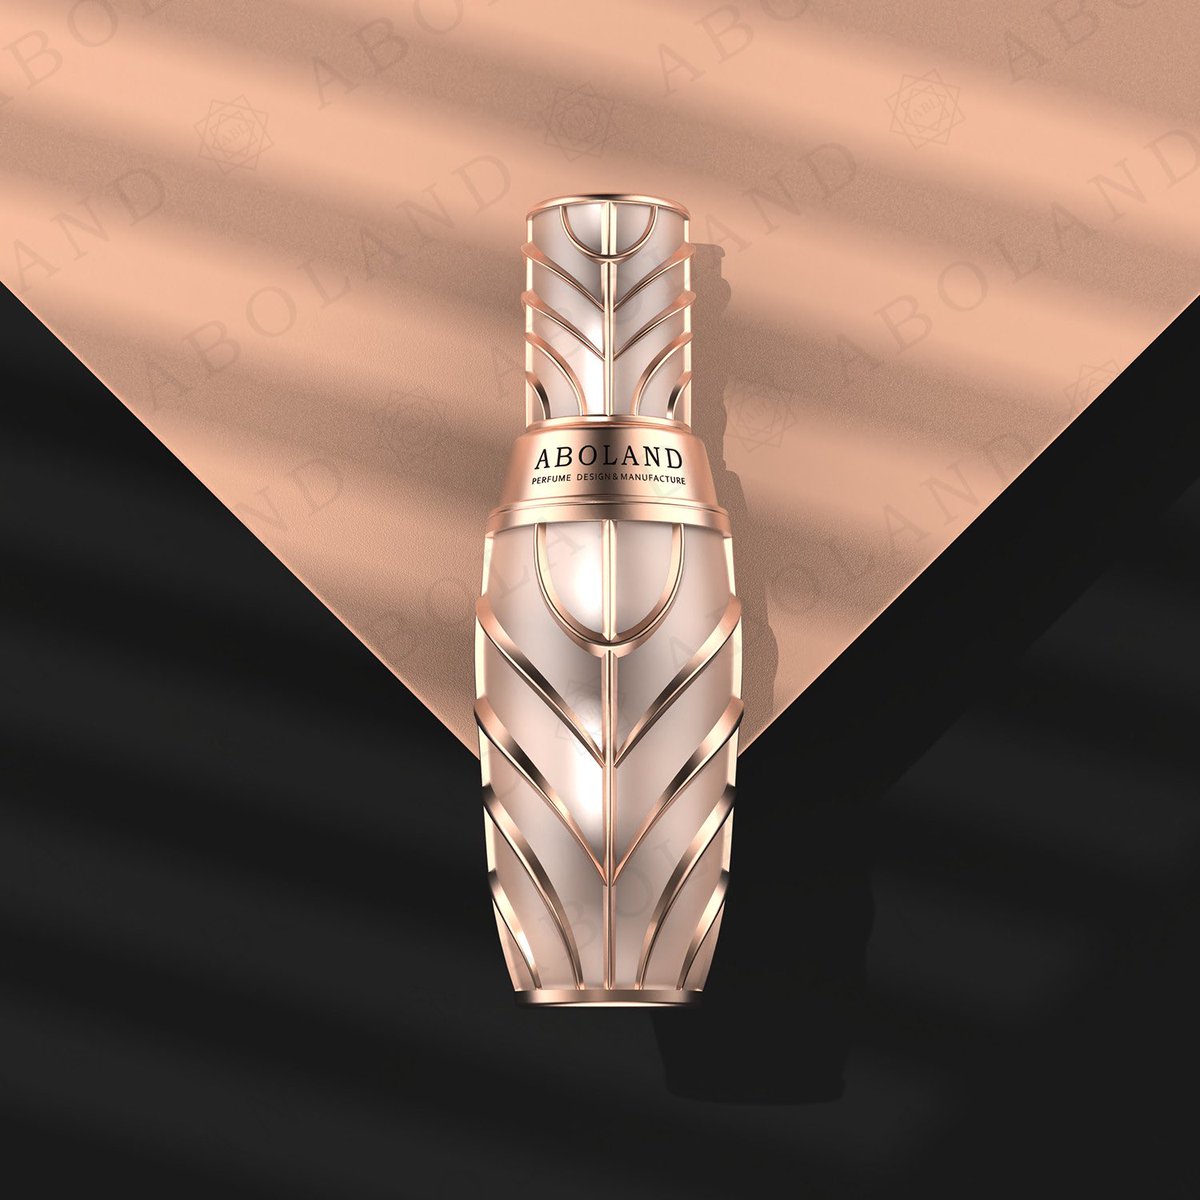 Aboland essential oil bottle design, inspired by the ear of wheat symbolizing abundance and harvest. This unique perfume bottle design is a beautiful addition to any collection. #PerfumeBottleDesign #AboLand #EssentialOil